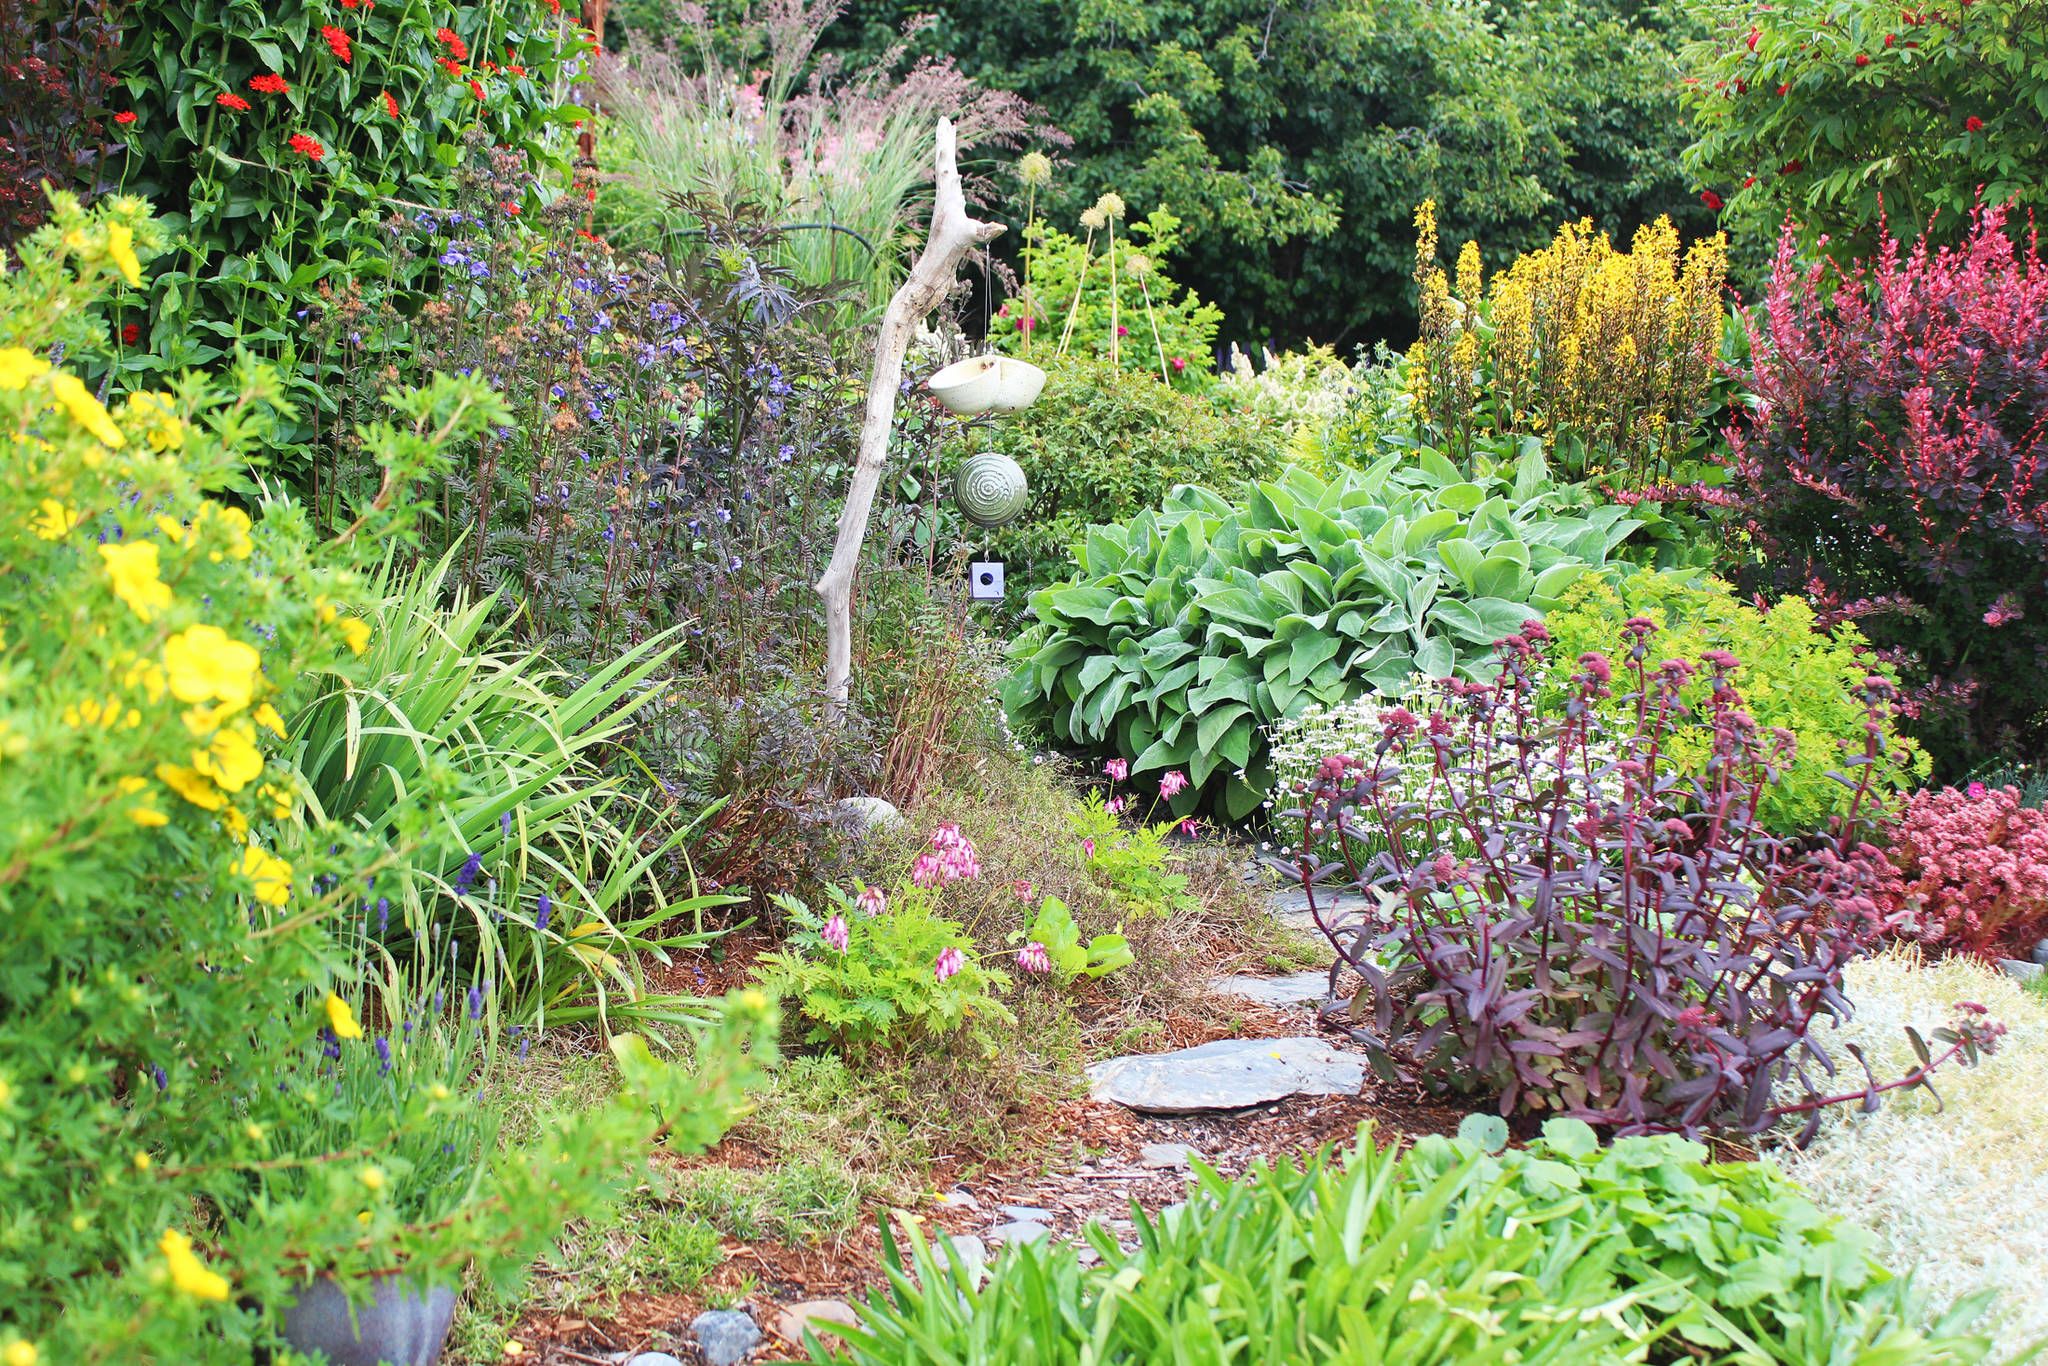 A stone walkway winds through one of the five expansive gardens available for visiting through the annual Garden Tour, held this year on Sunday, July 28, 2019 in and around Homer, Alaska. (Photo by Megan Pacer/Homer News)